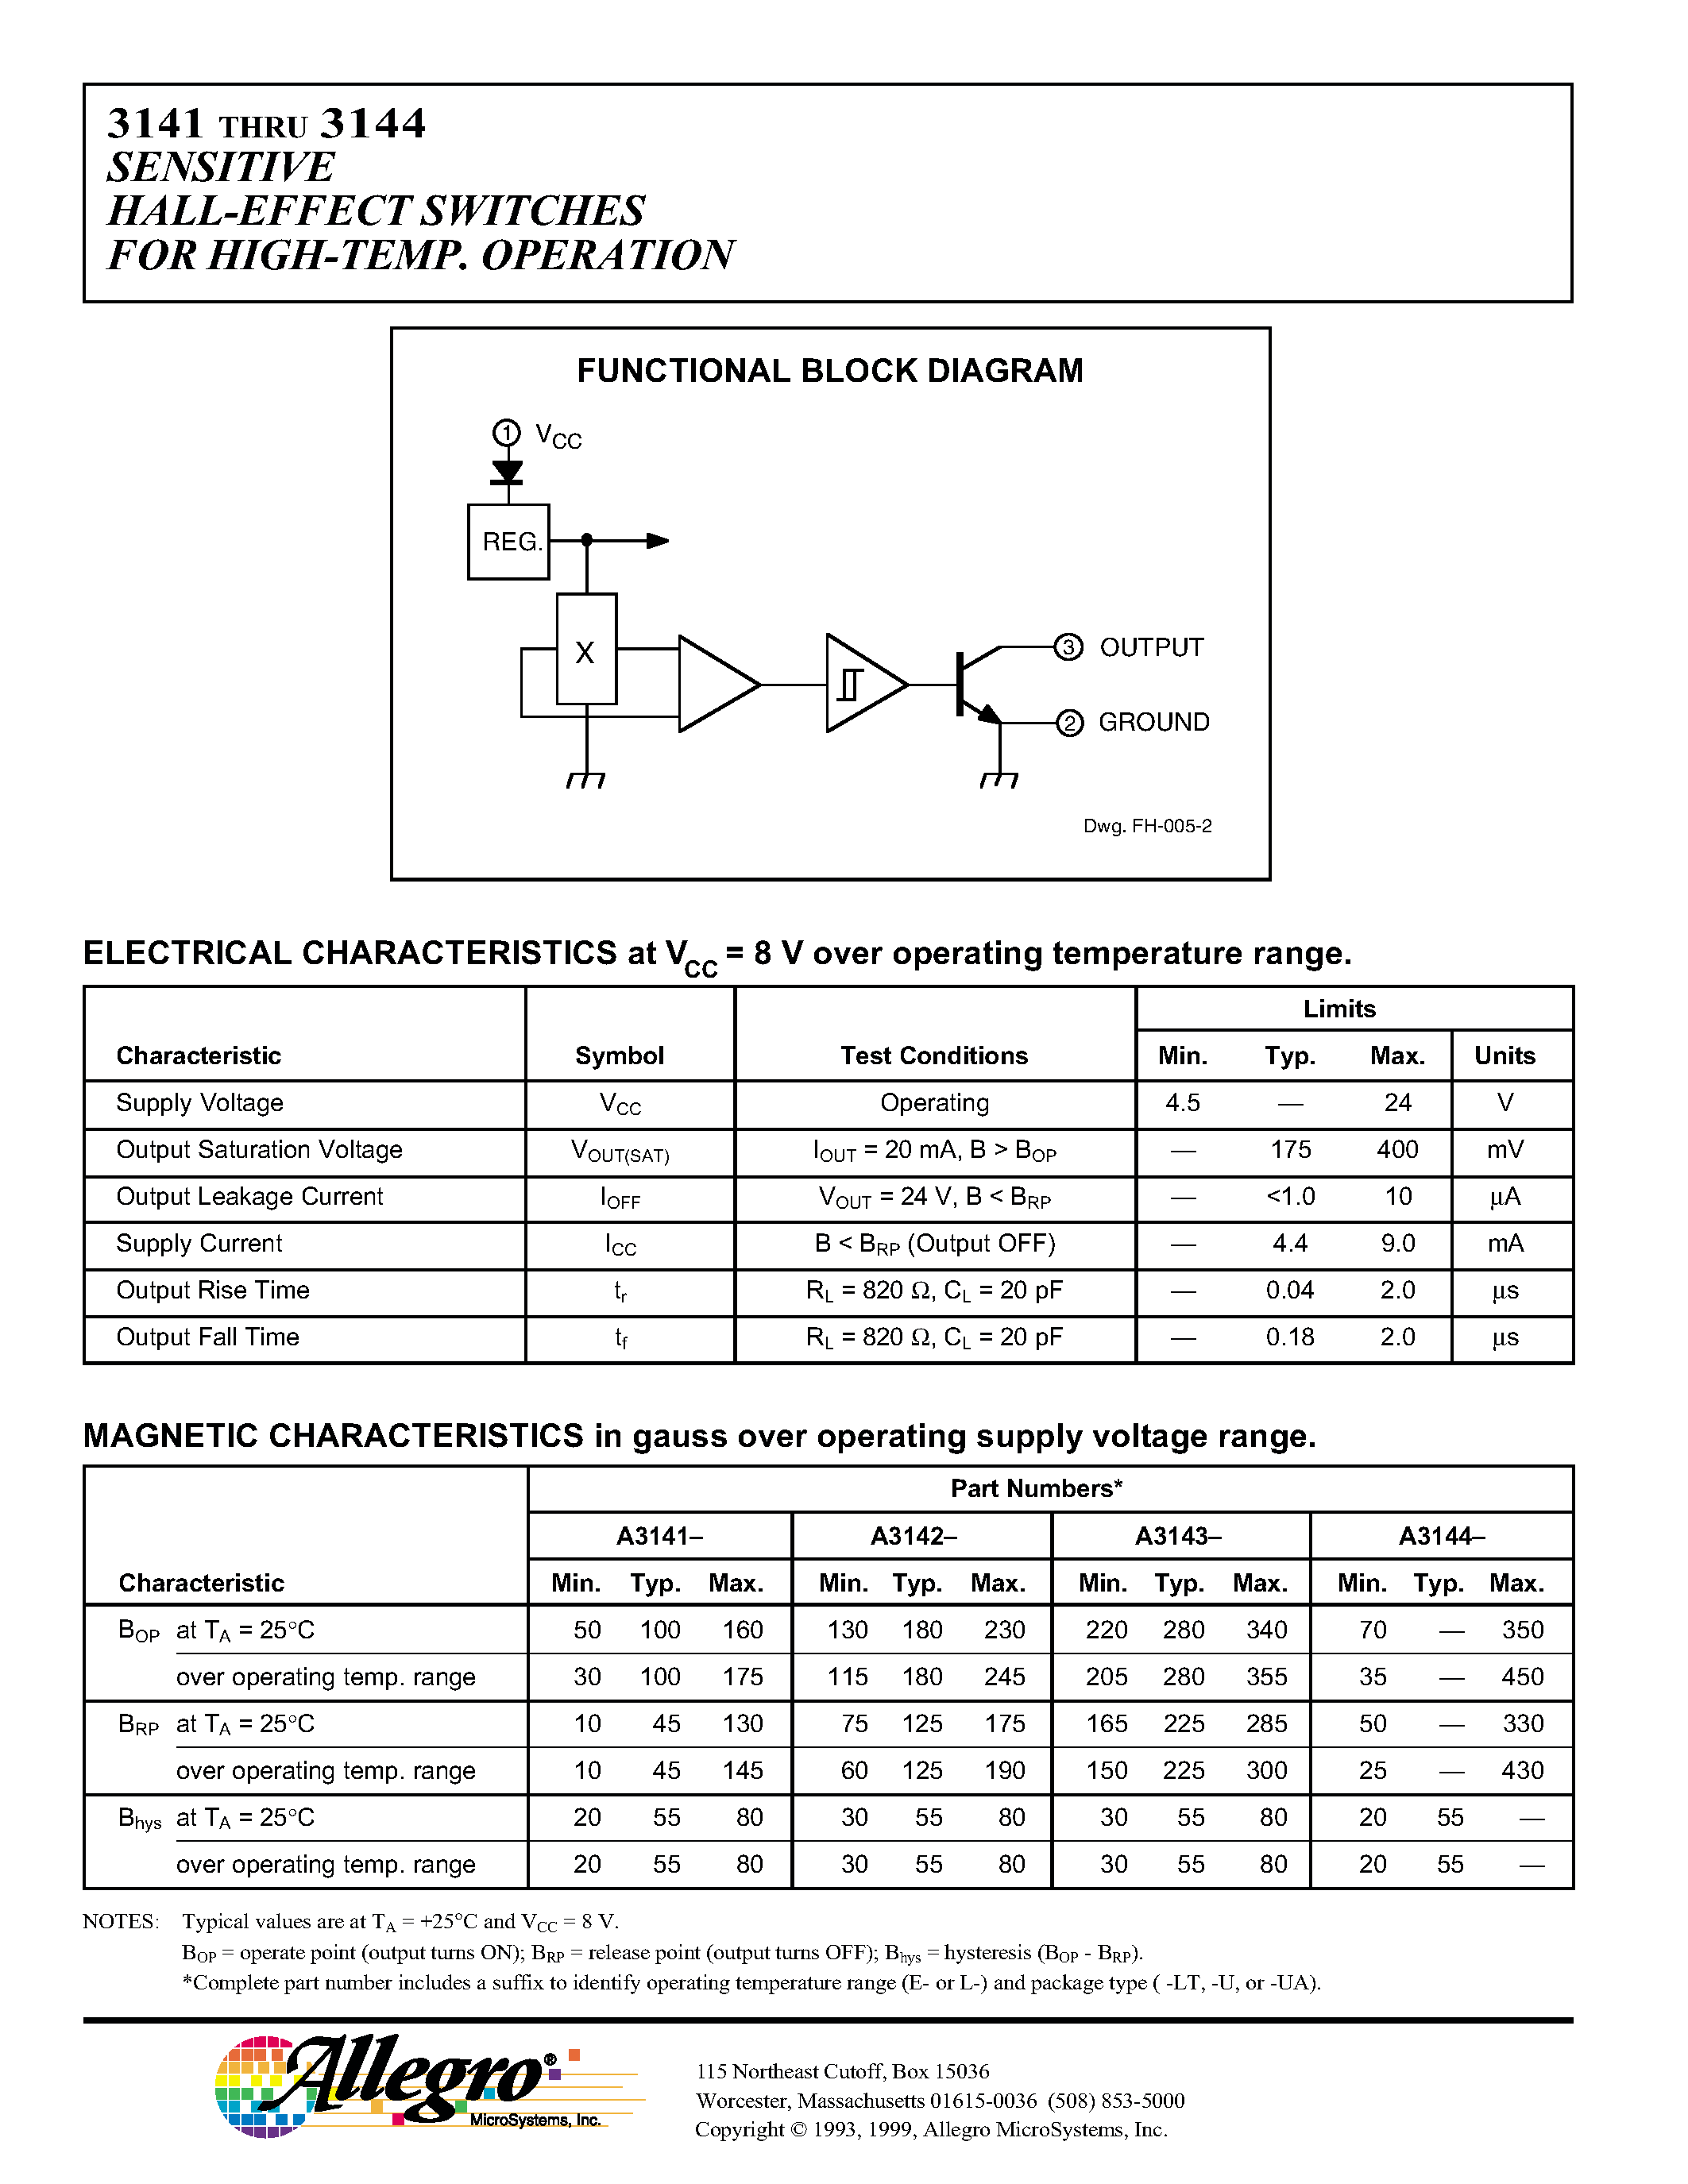 Даташит A3143-U - SENSITIVE HALL-EFFECT SWITCHES FOR HIGH-TEMPERATURE OPERATION страница 2